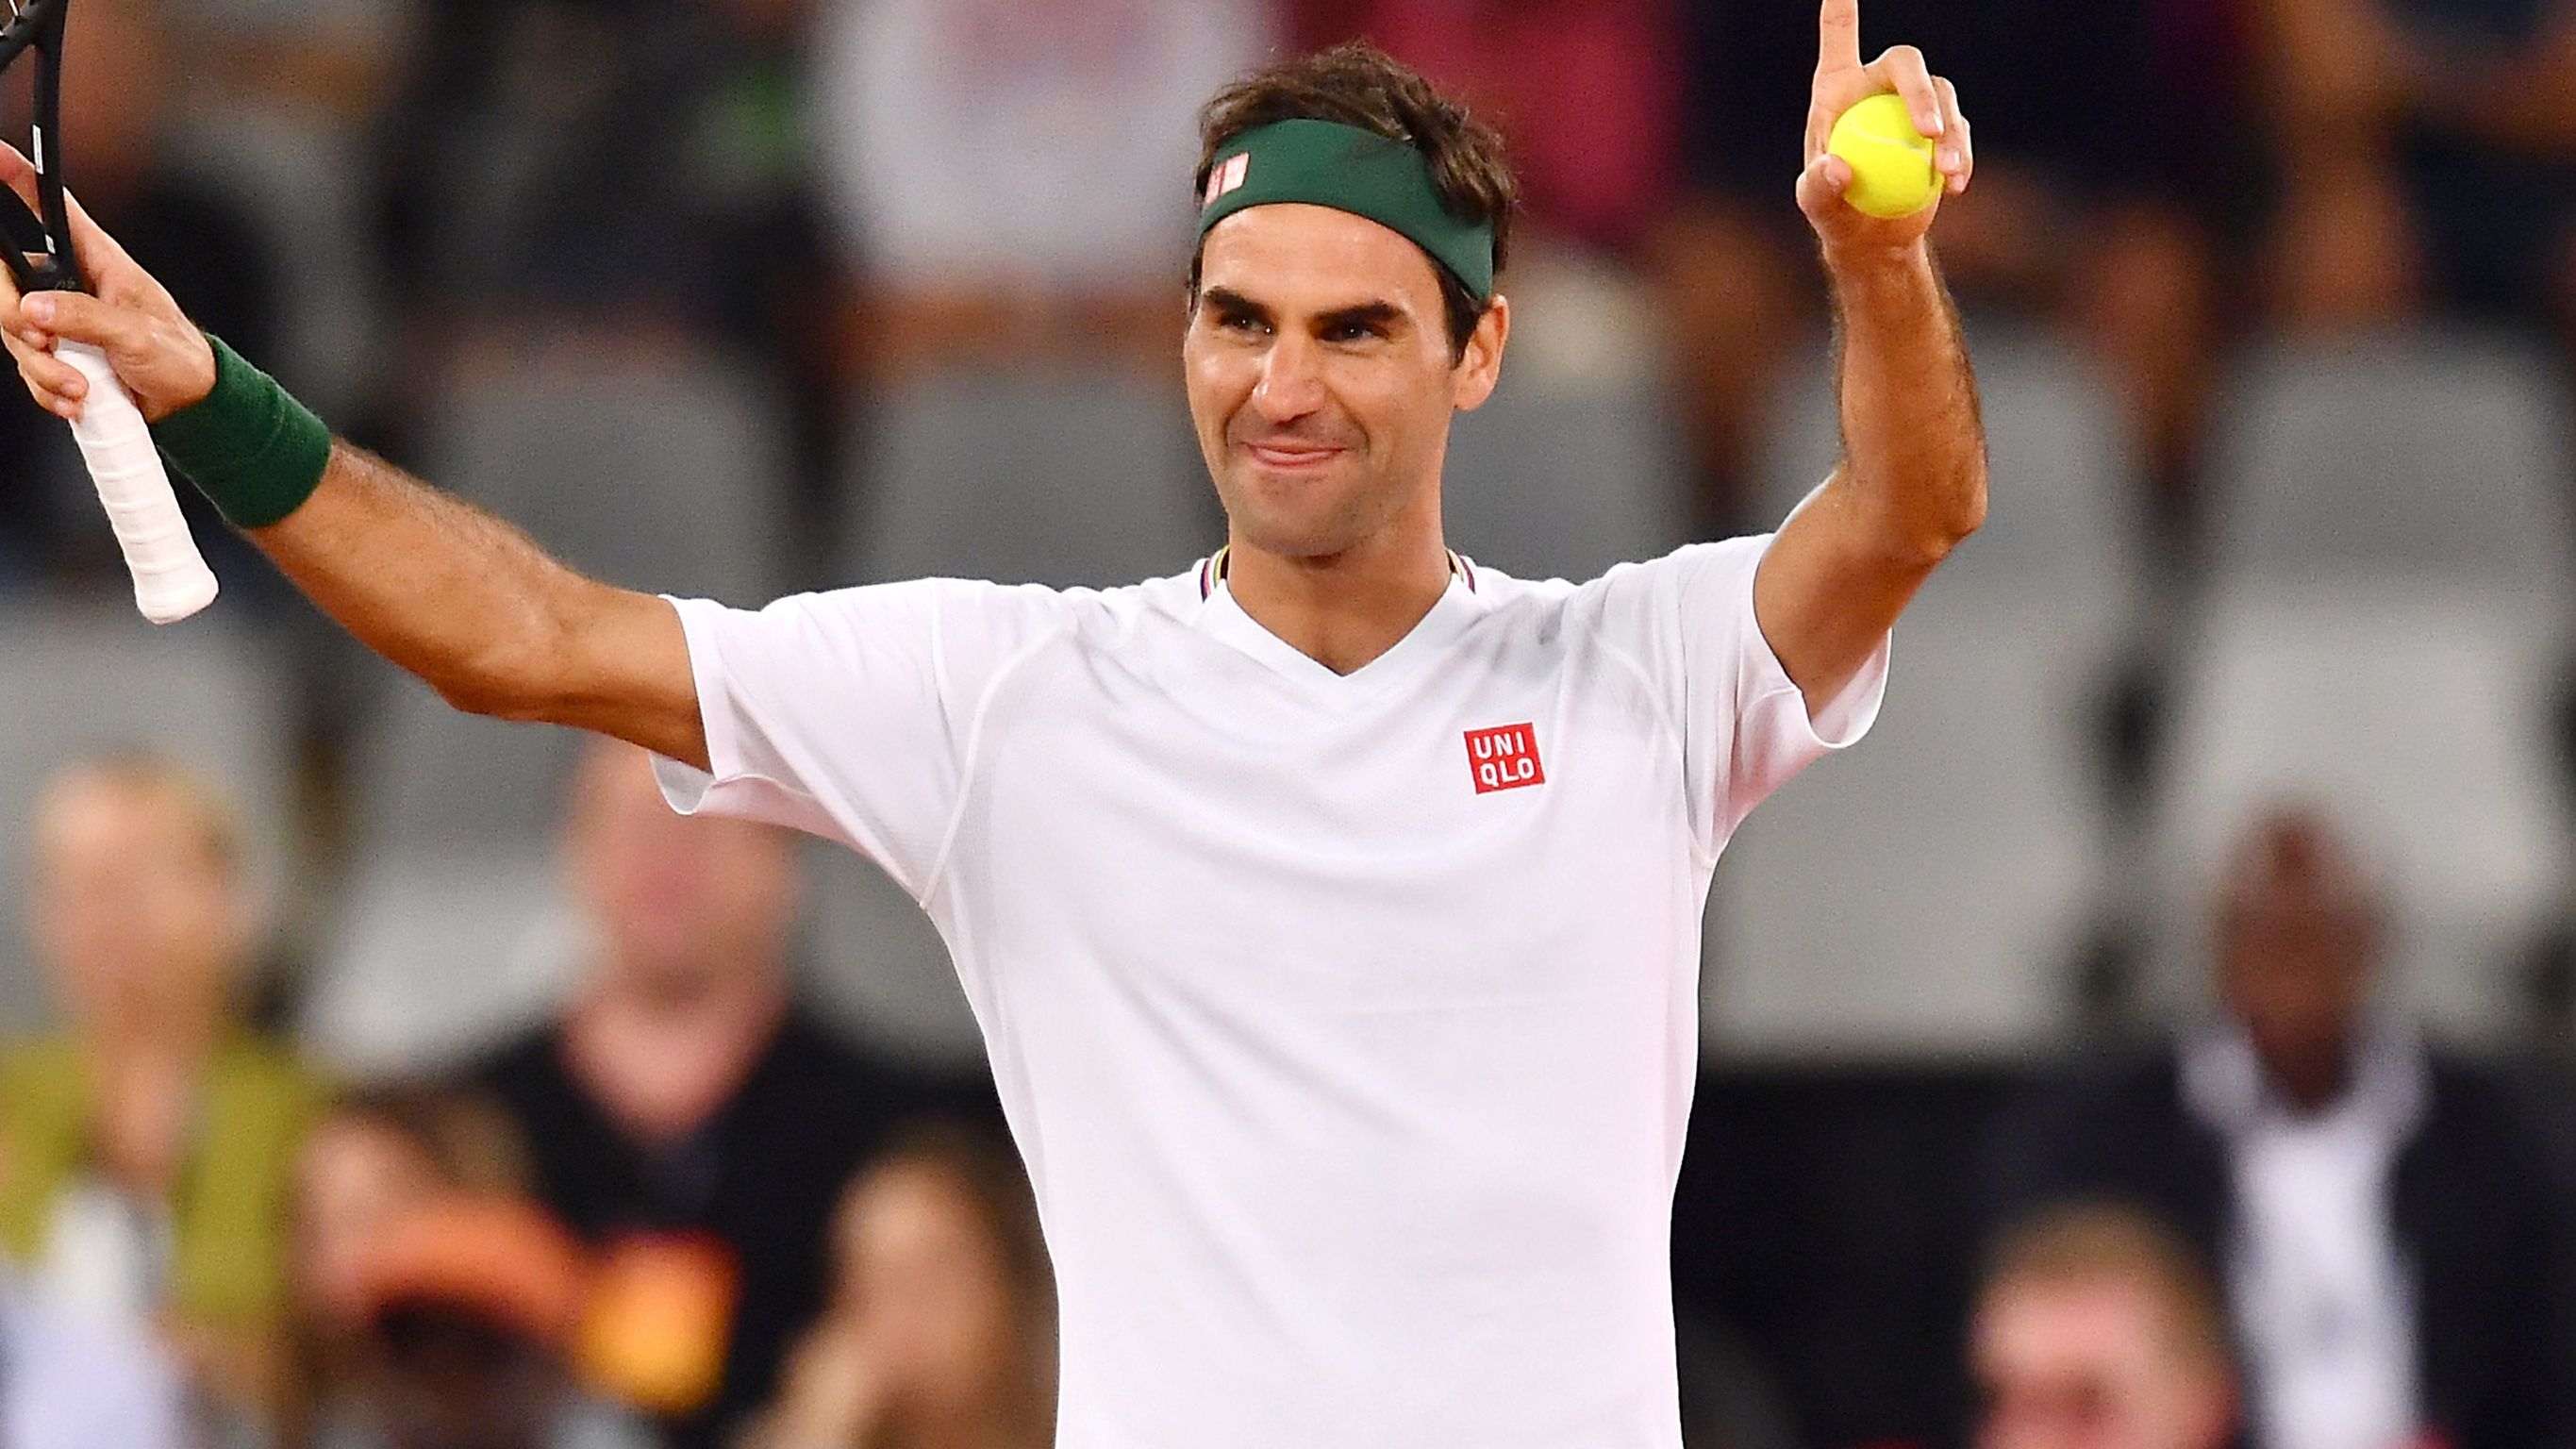 Craig Gabriel: Why 'grieving' Roger Federer will always be the GOAT for so many tennis fans